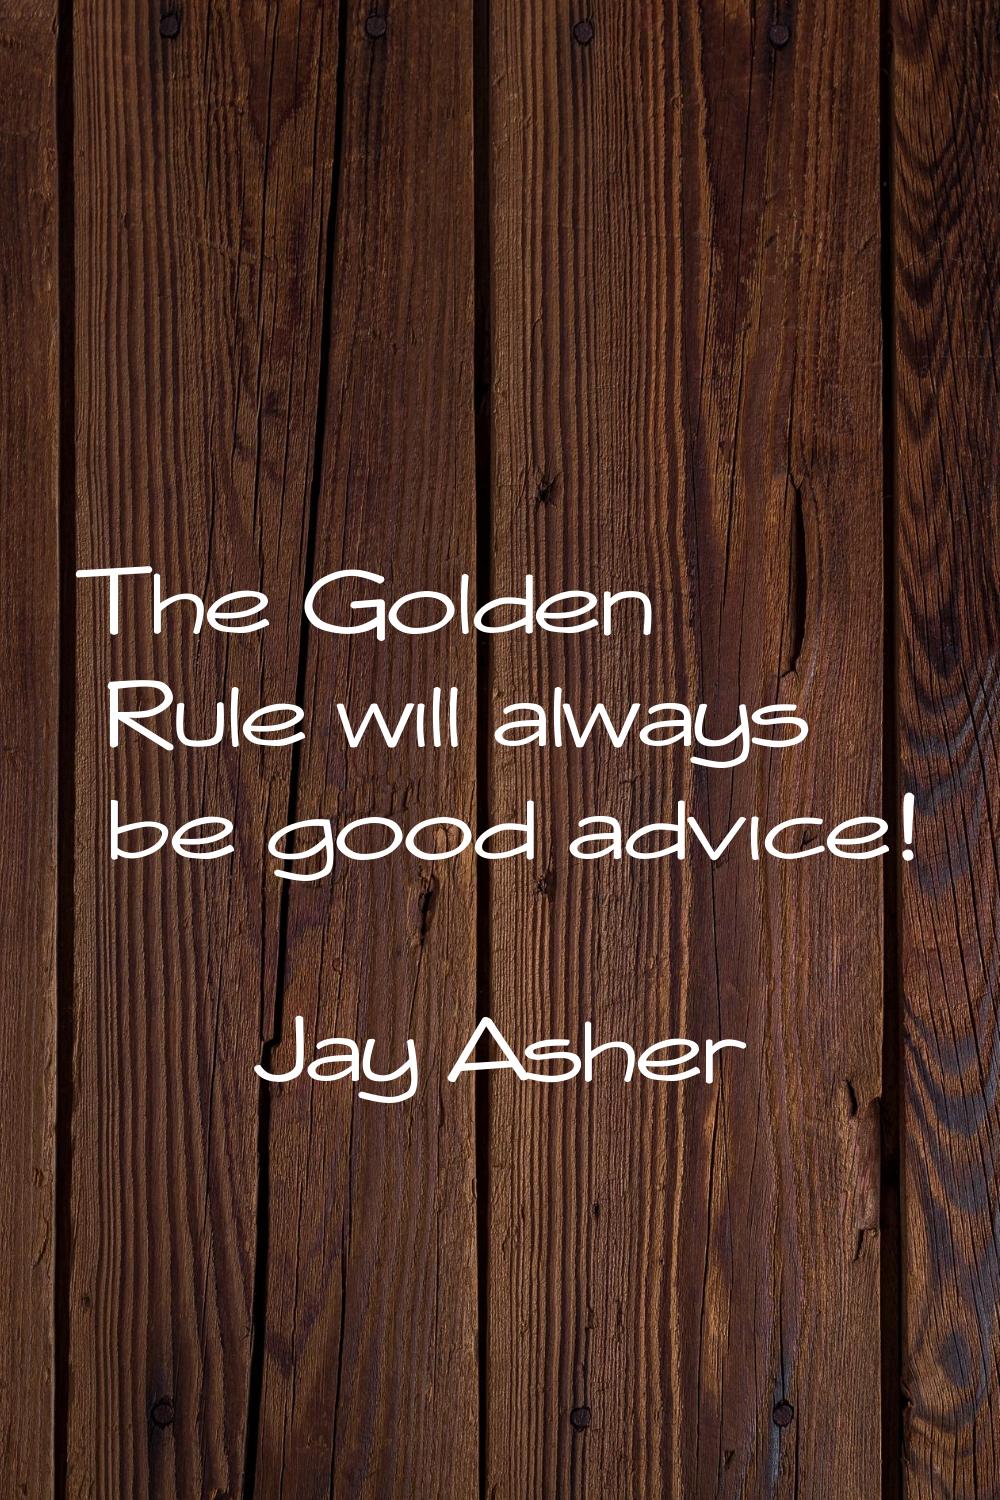 The Golden Rule will always be good advice!